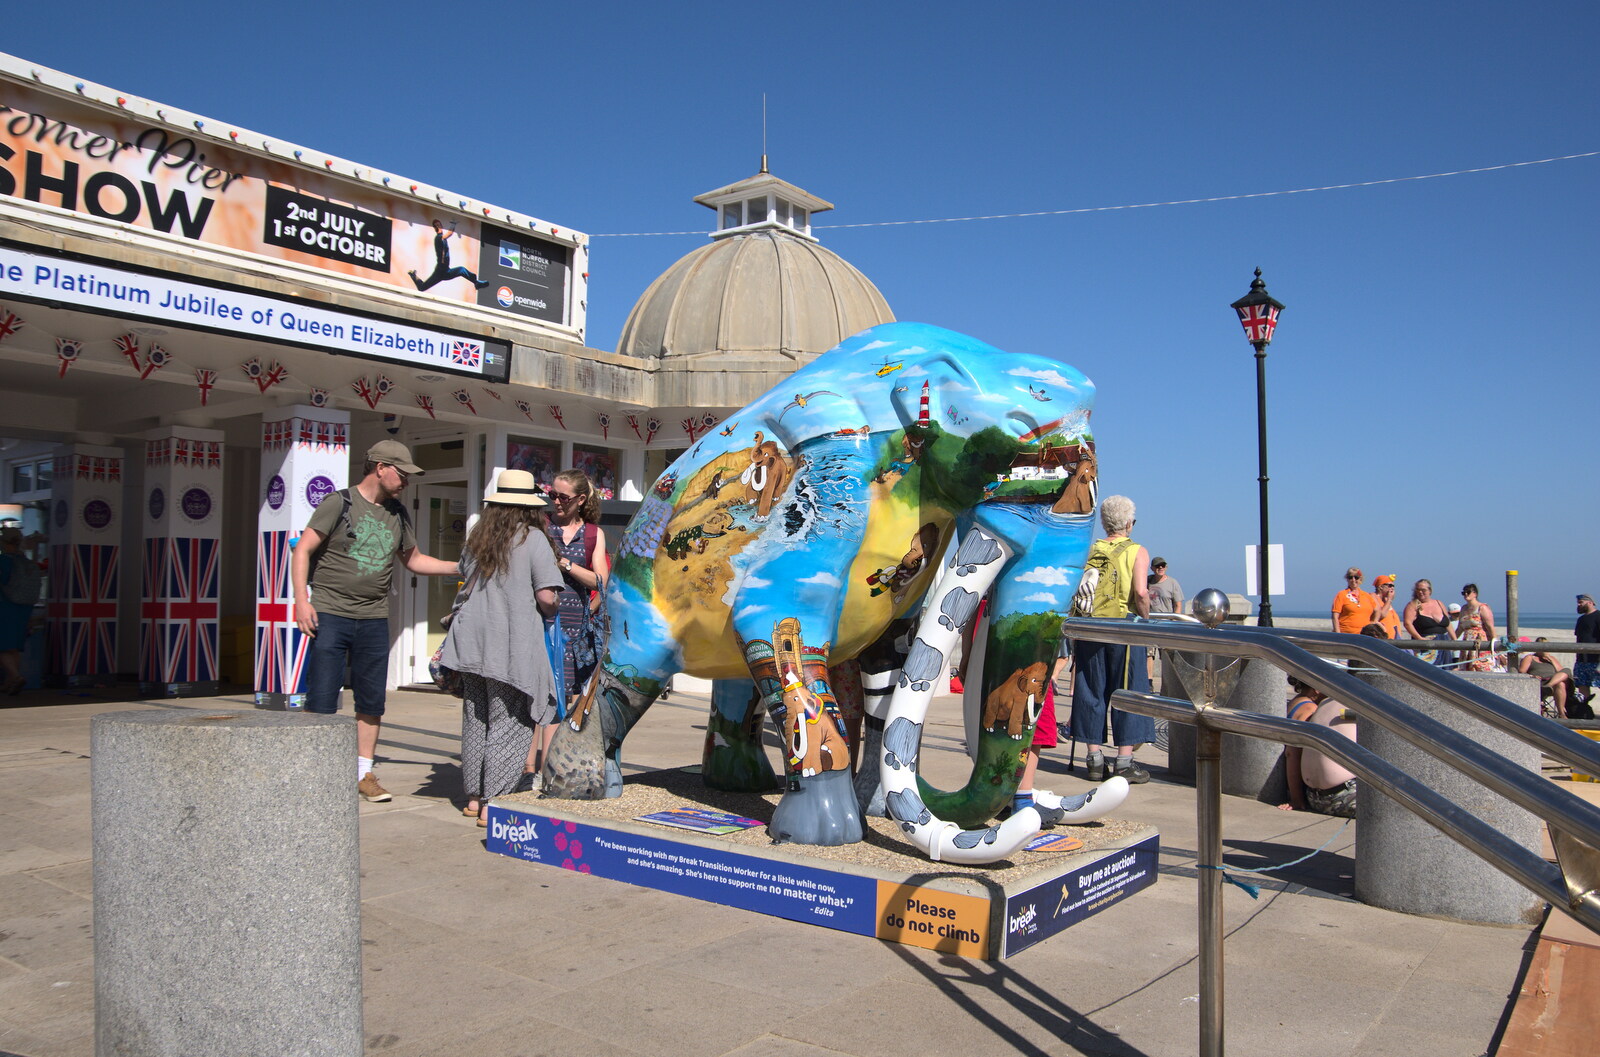 A painted woolly mammoth statue from Camping at Forest Park, Cromer, Norfolk - 12th August 2022